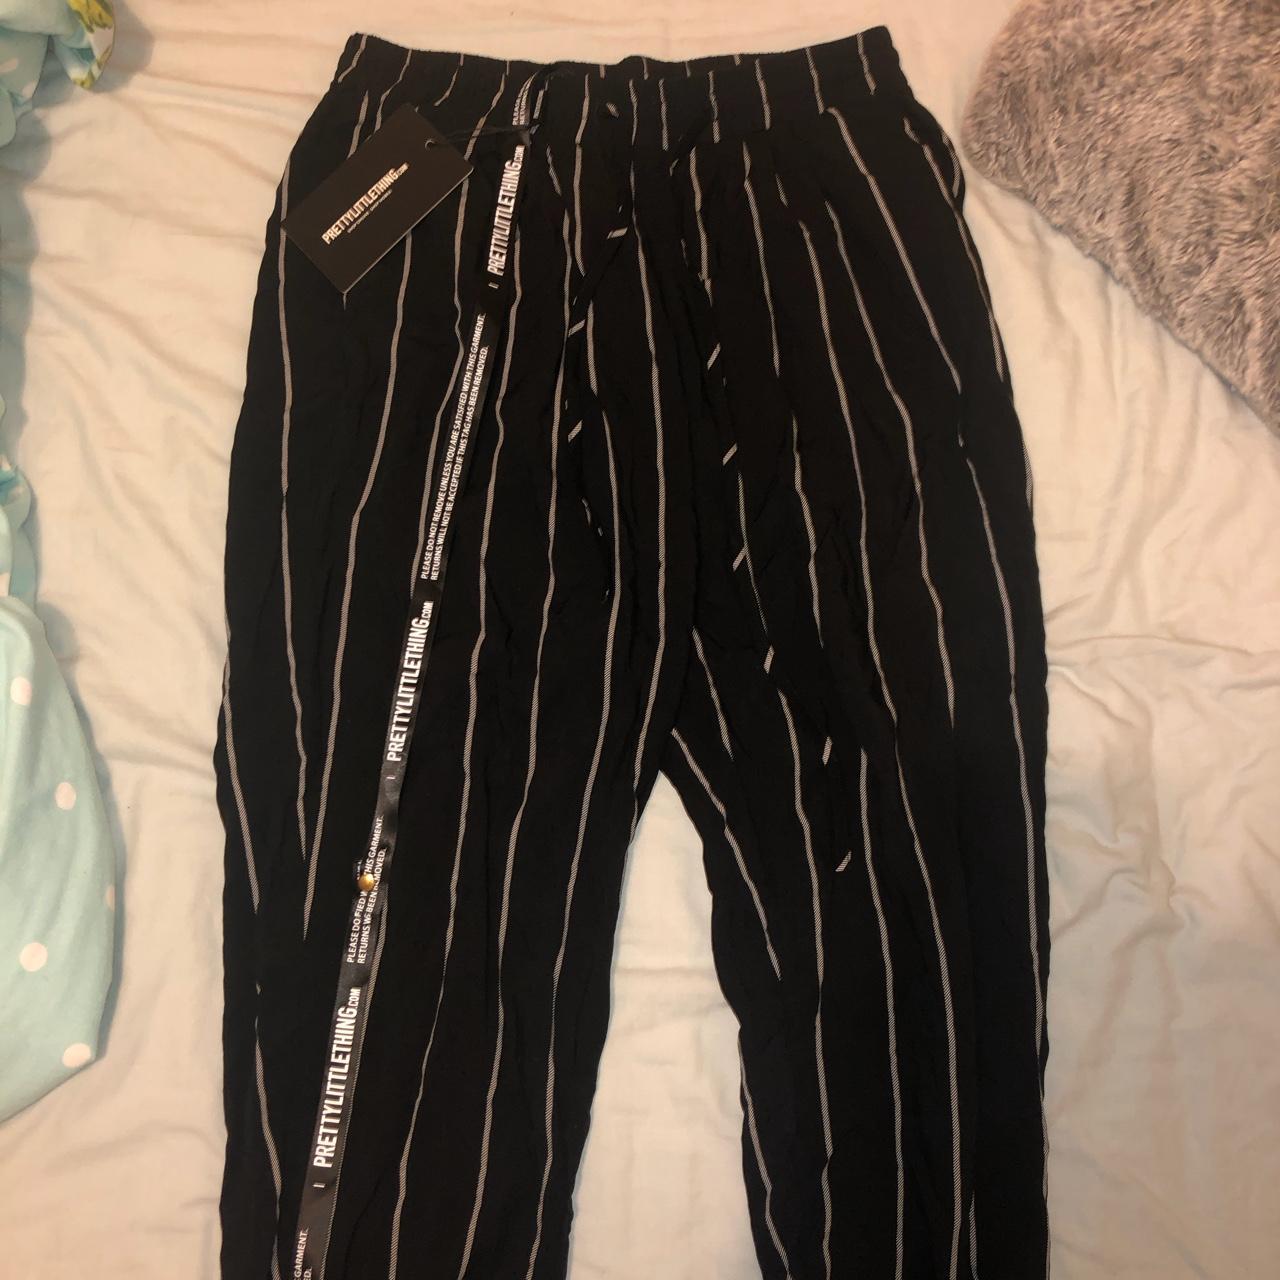 Buy Conversation Black Pants With Colorful Pinstripes online - Etcetera